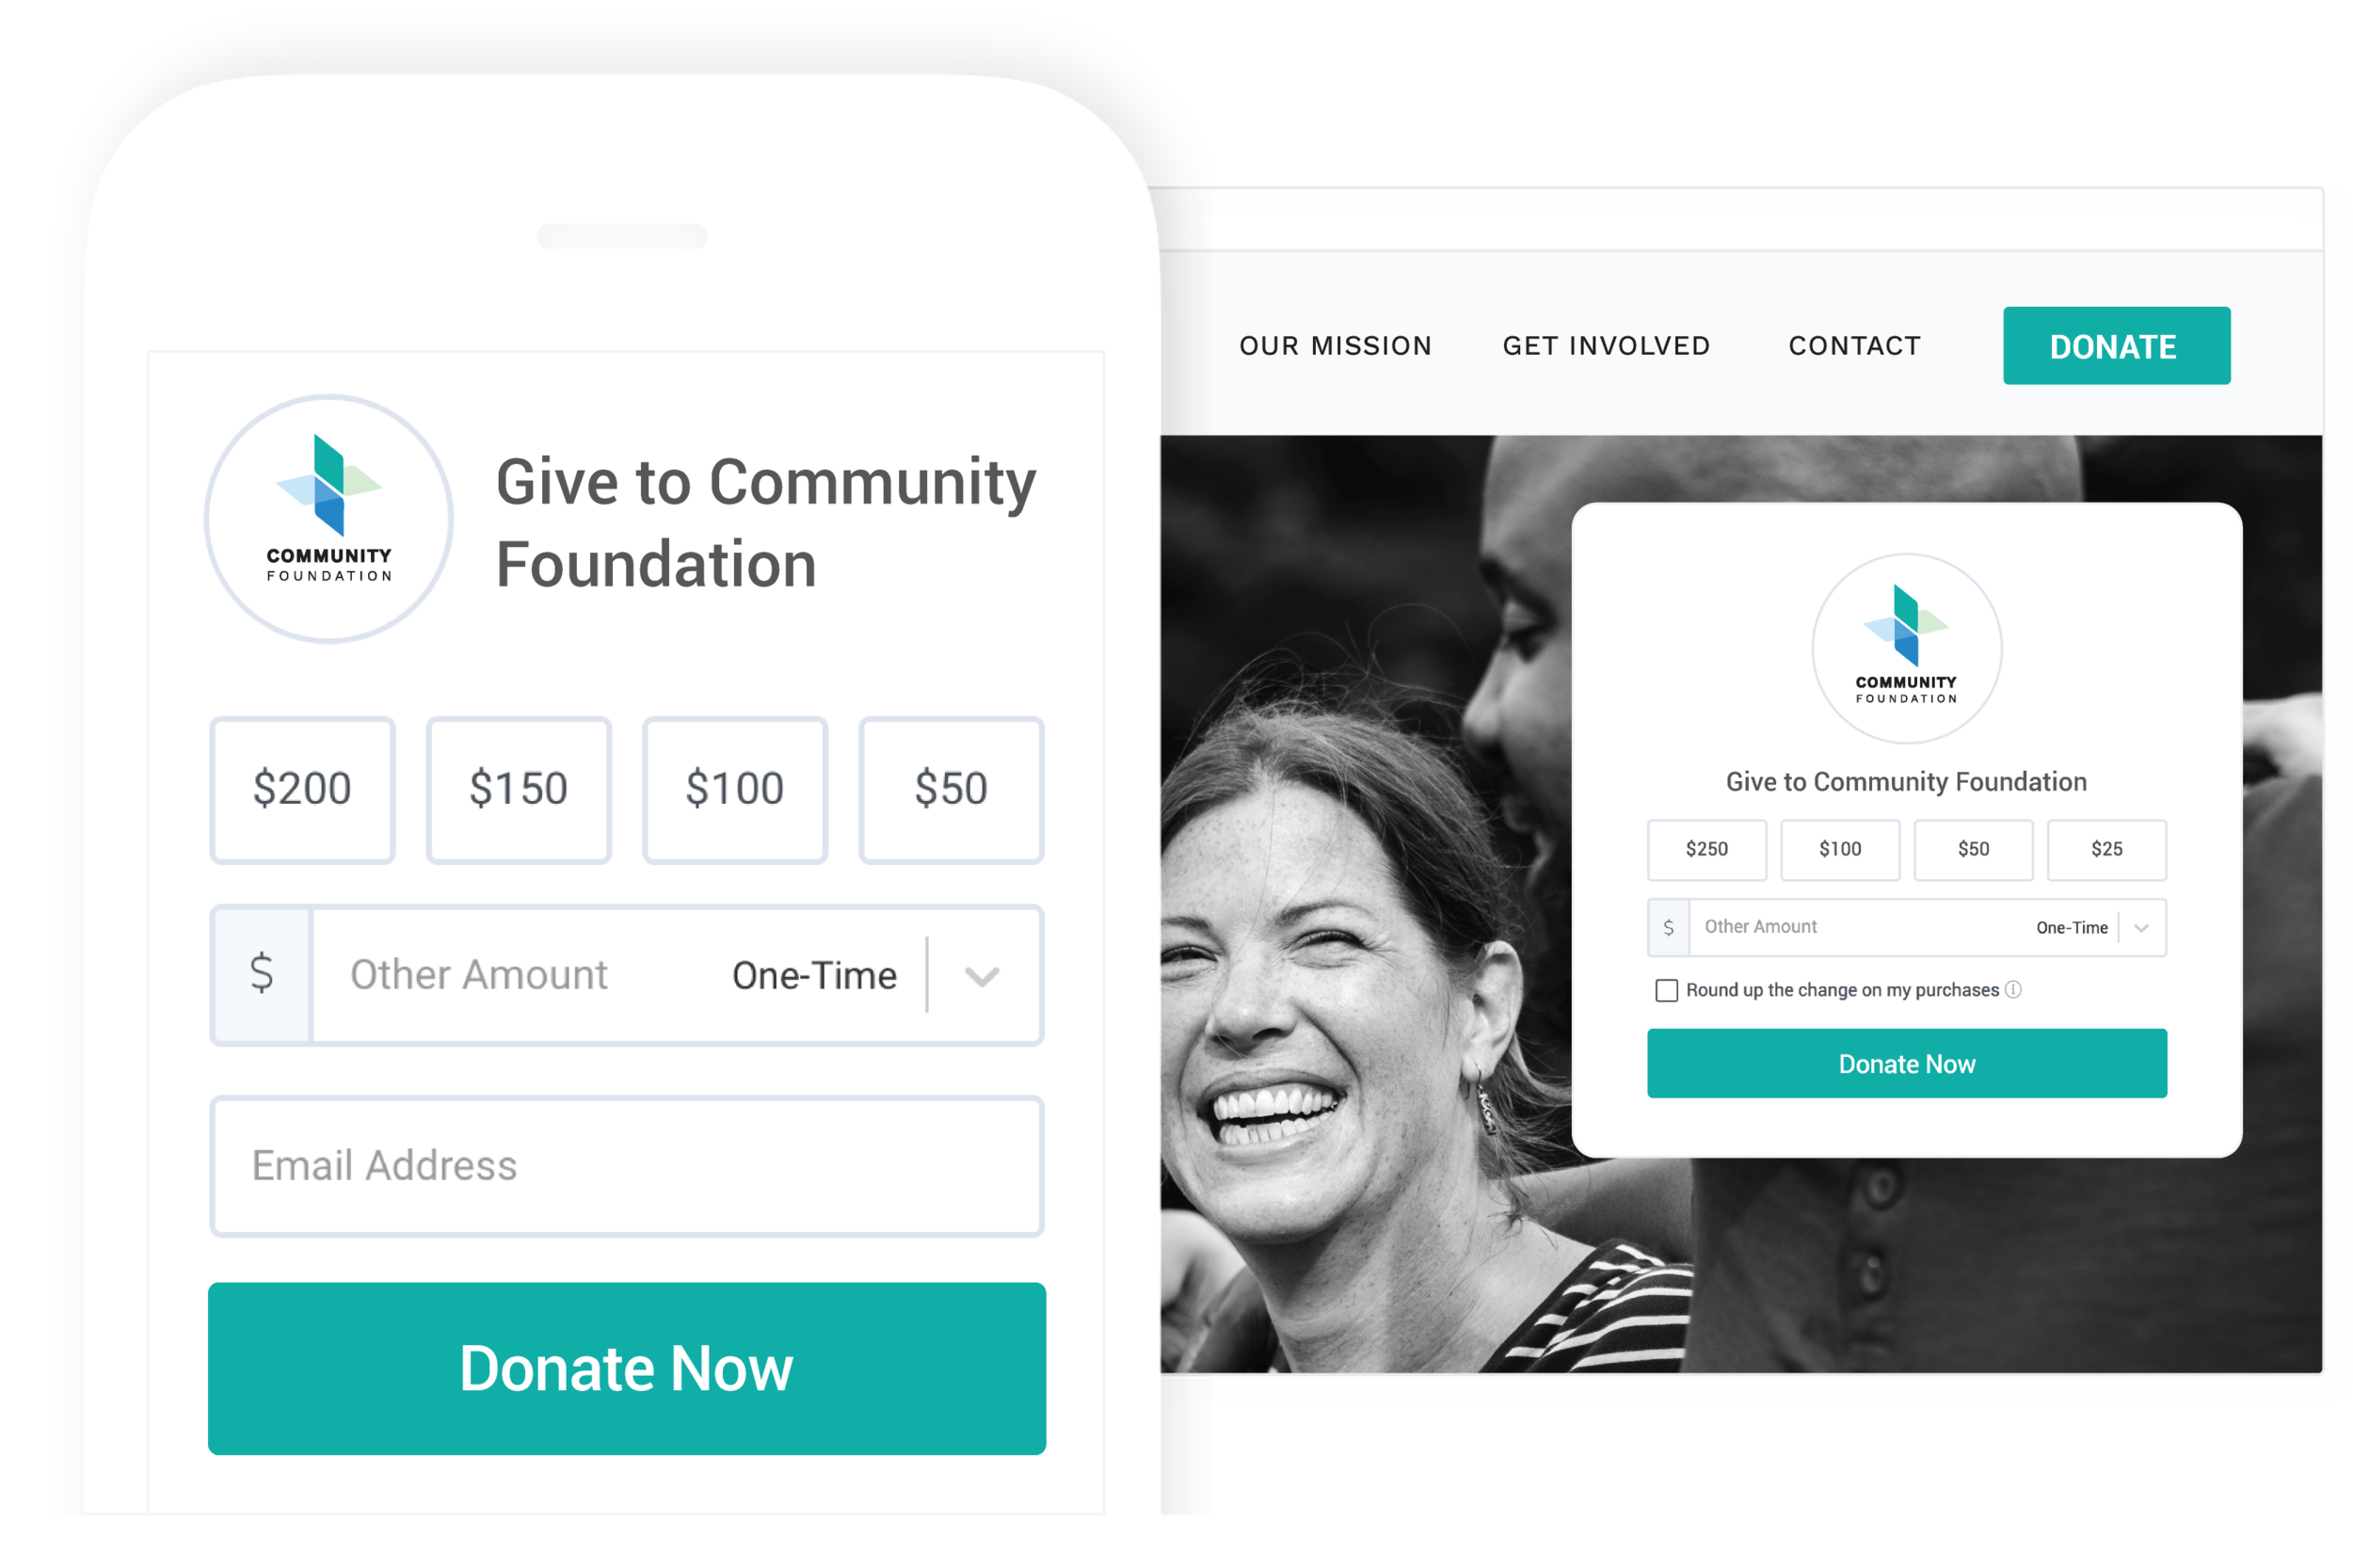 Optimized for all devices - Collect donations anywhere with sleek forms that are optimized for a phone, tablet or desktop.